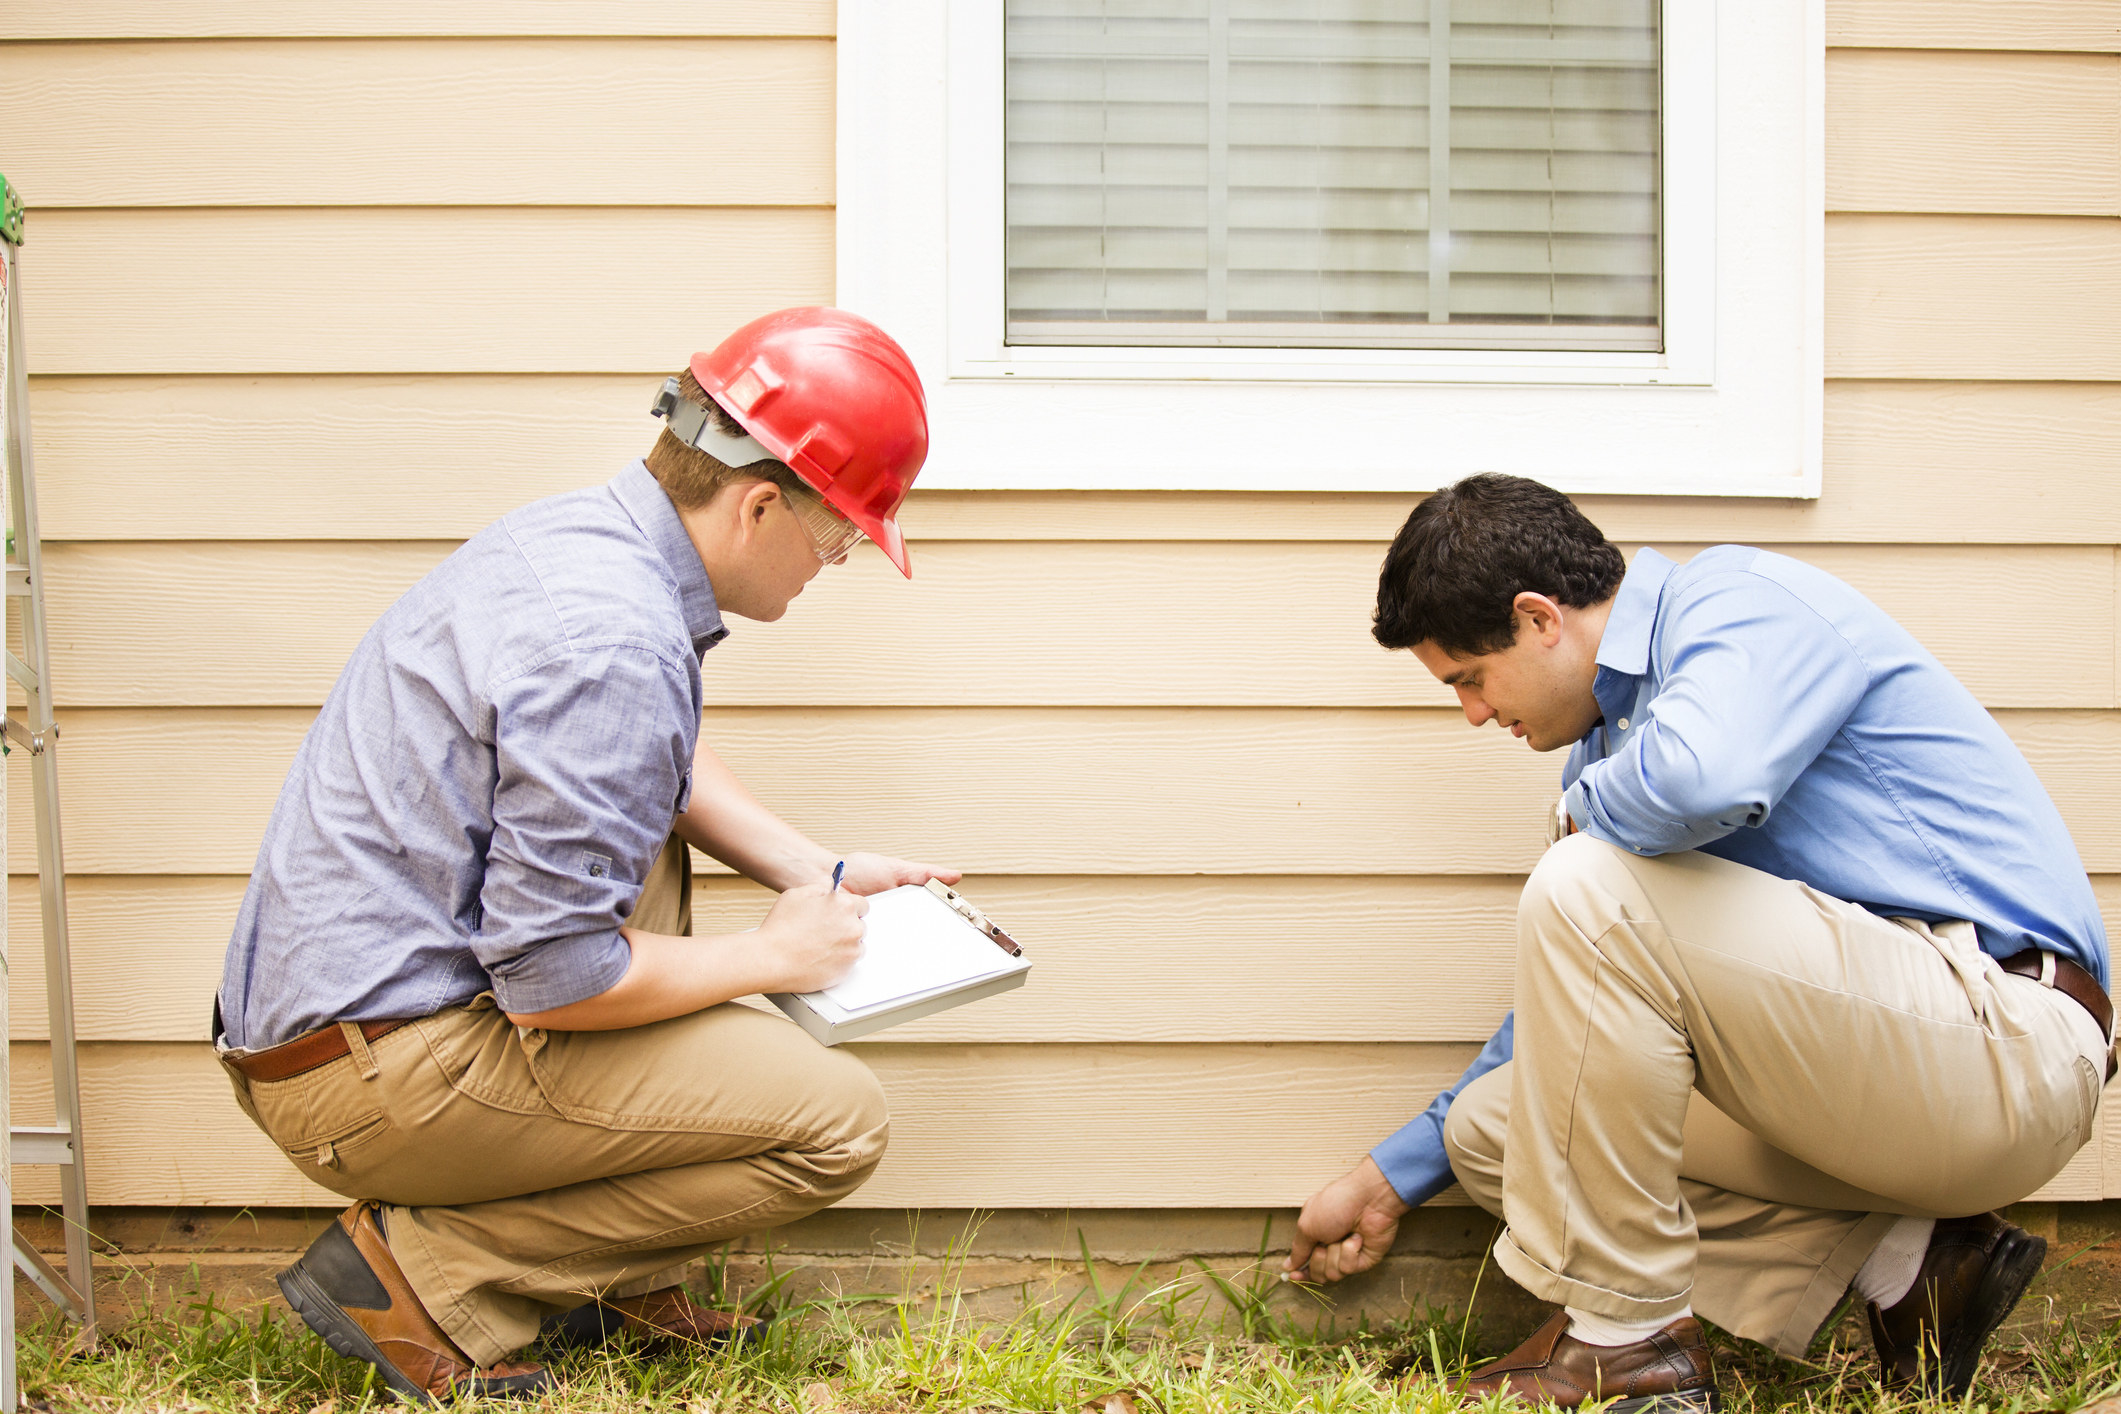 Two home inspectors evaluate the exterior of a home